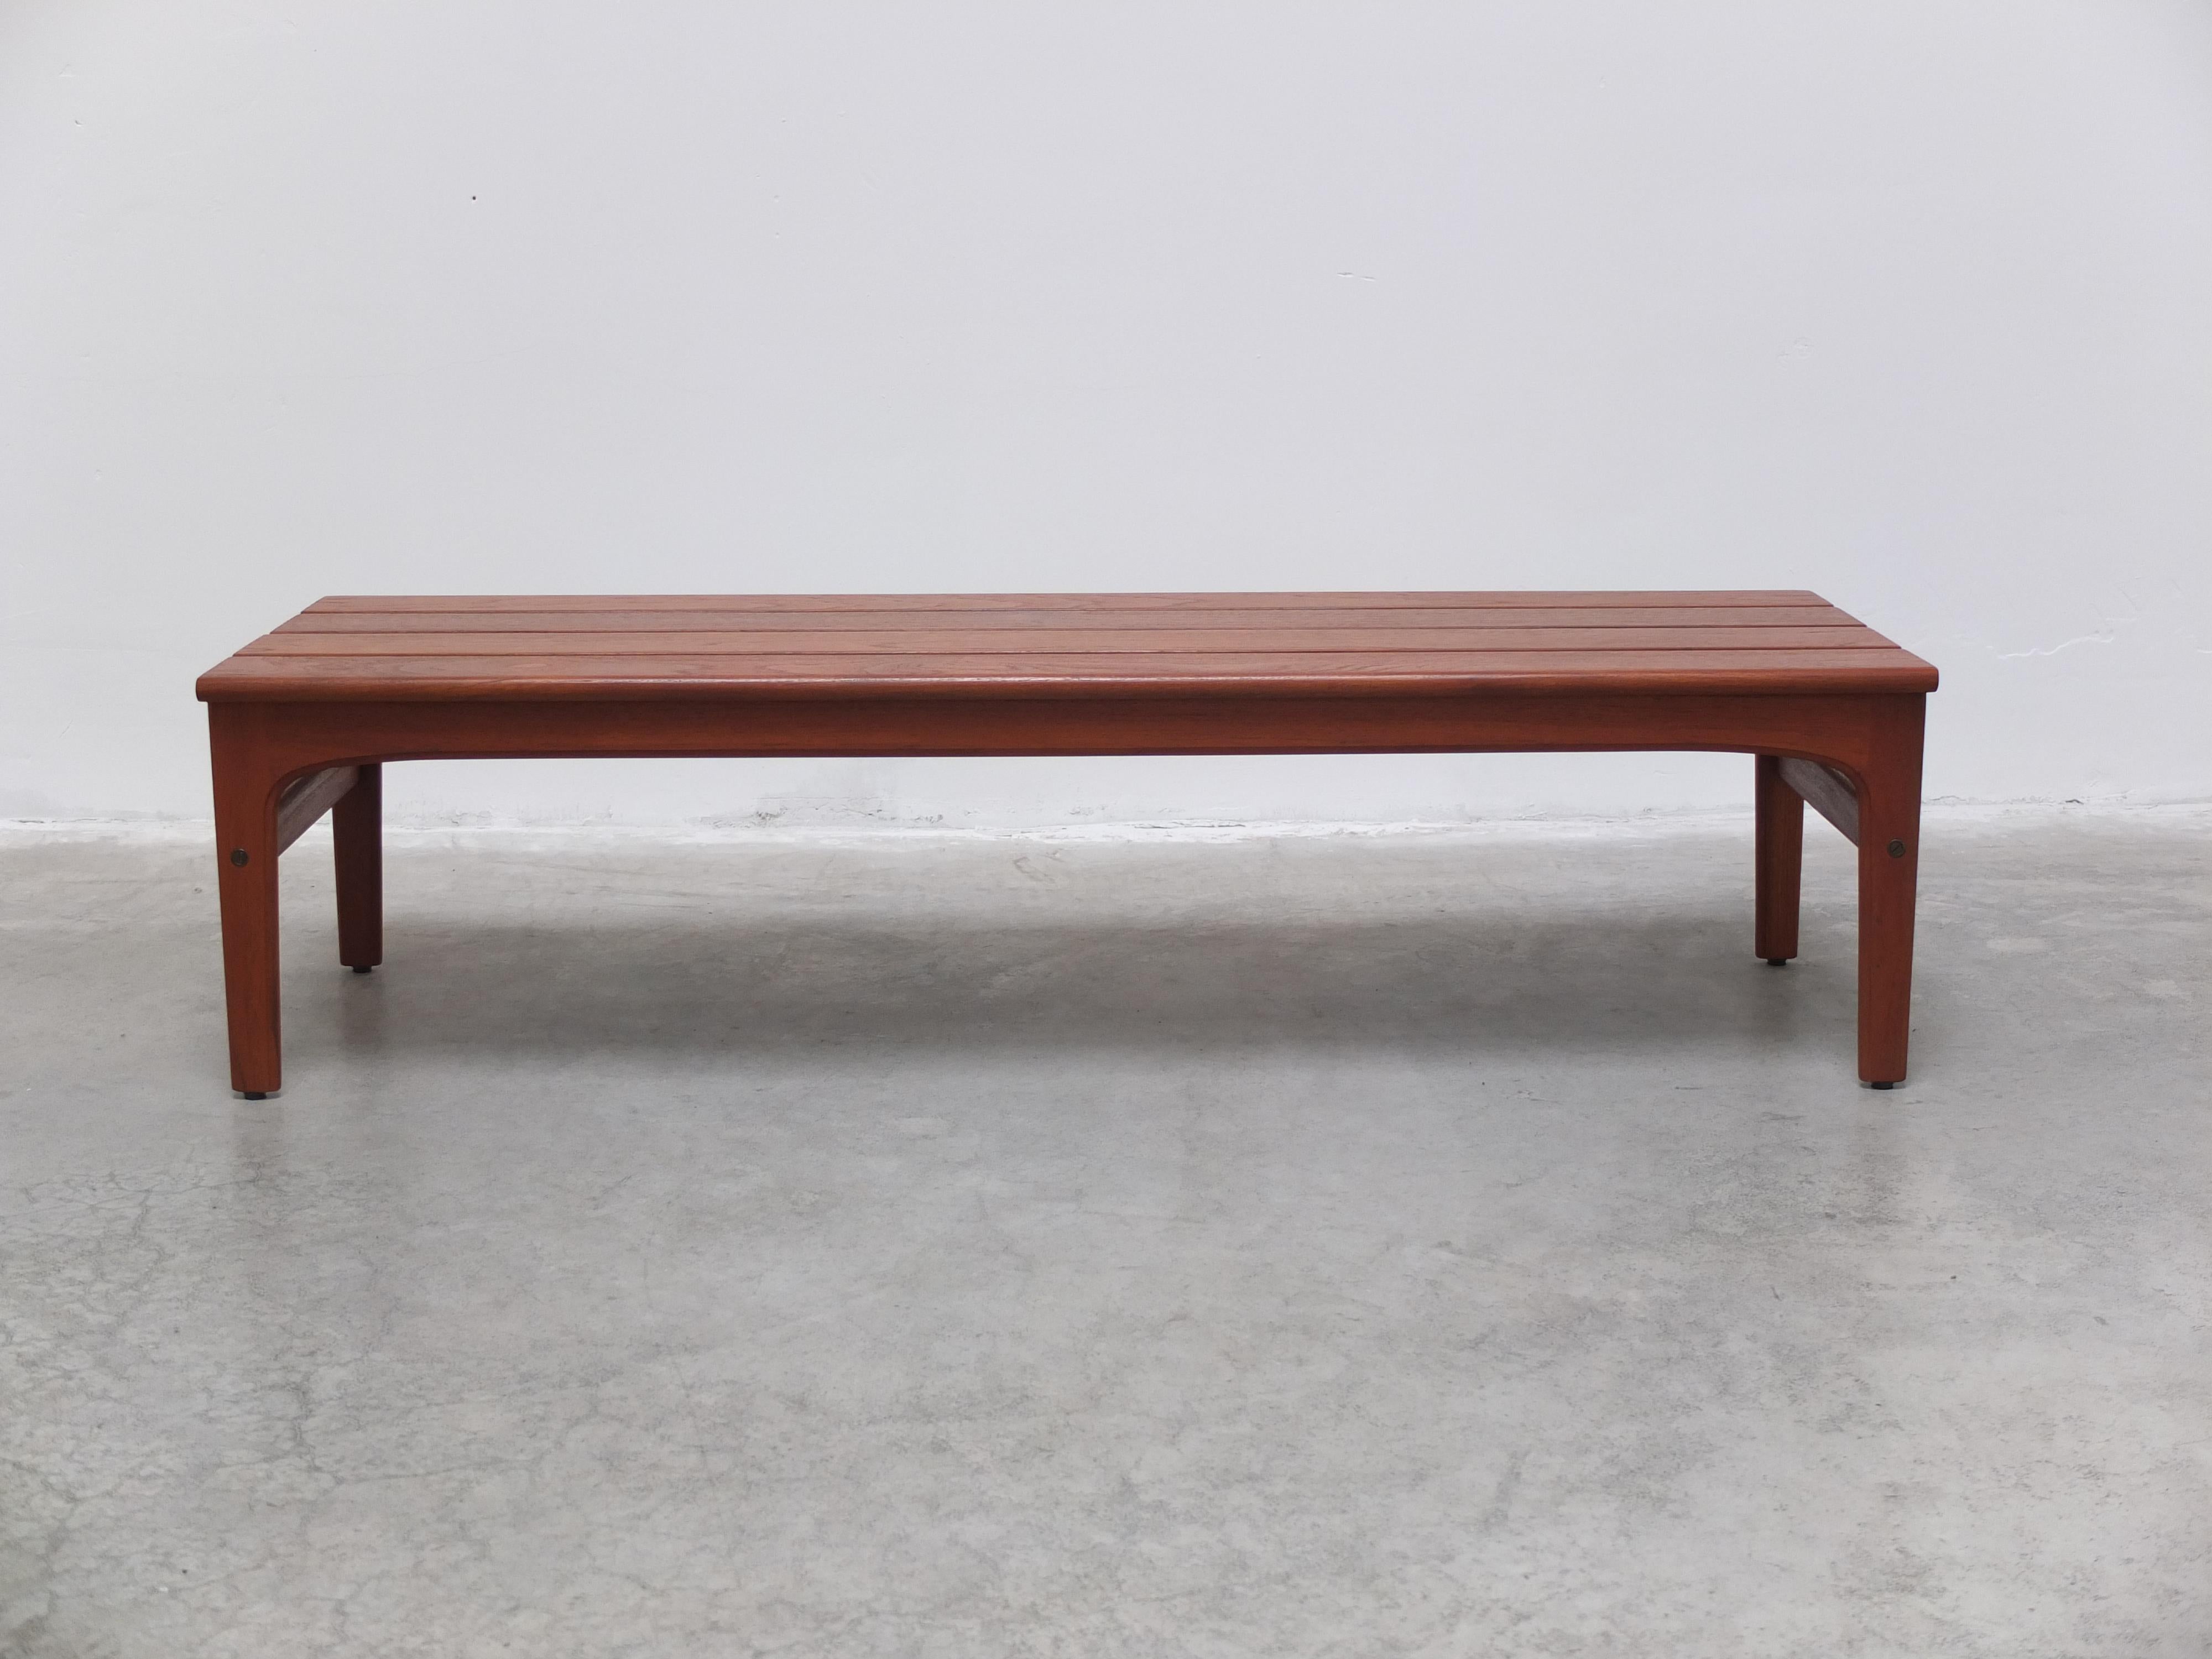 A beautiful slatted bench or coffee table designed by Yngvar Sandström for AB Sëffle Möbelfabrik during the 1960s. Made of solid teak and in mint restored condition. Brought back straight from Sweden during our last buying trip. Labeled by the